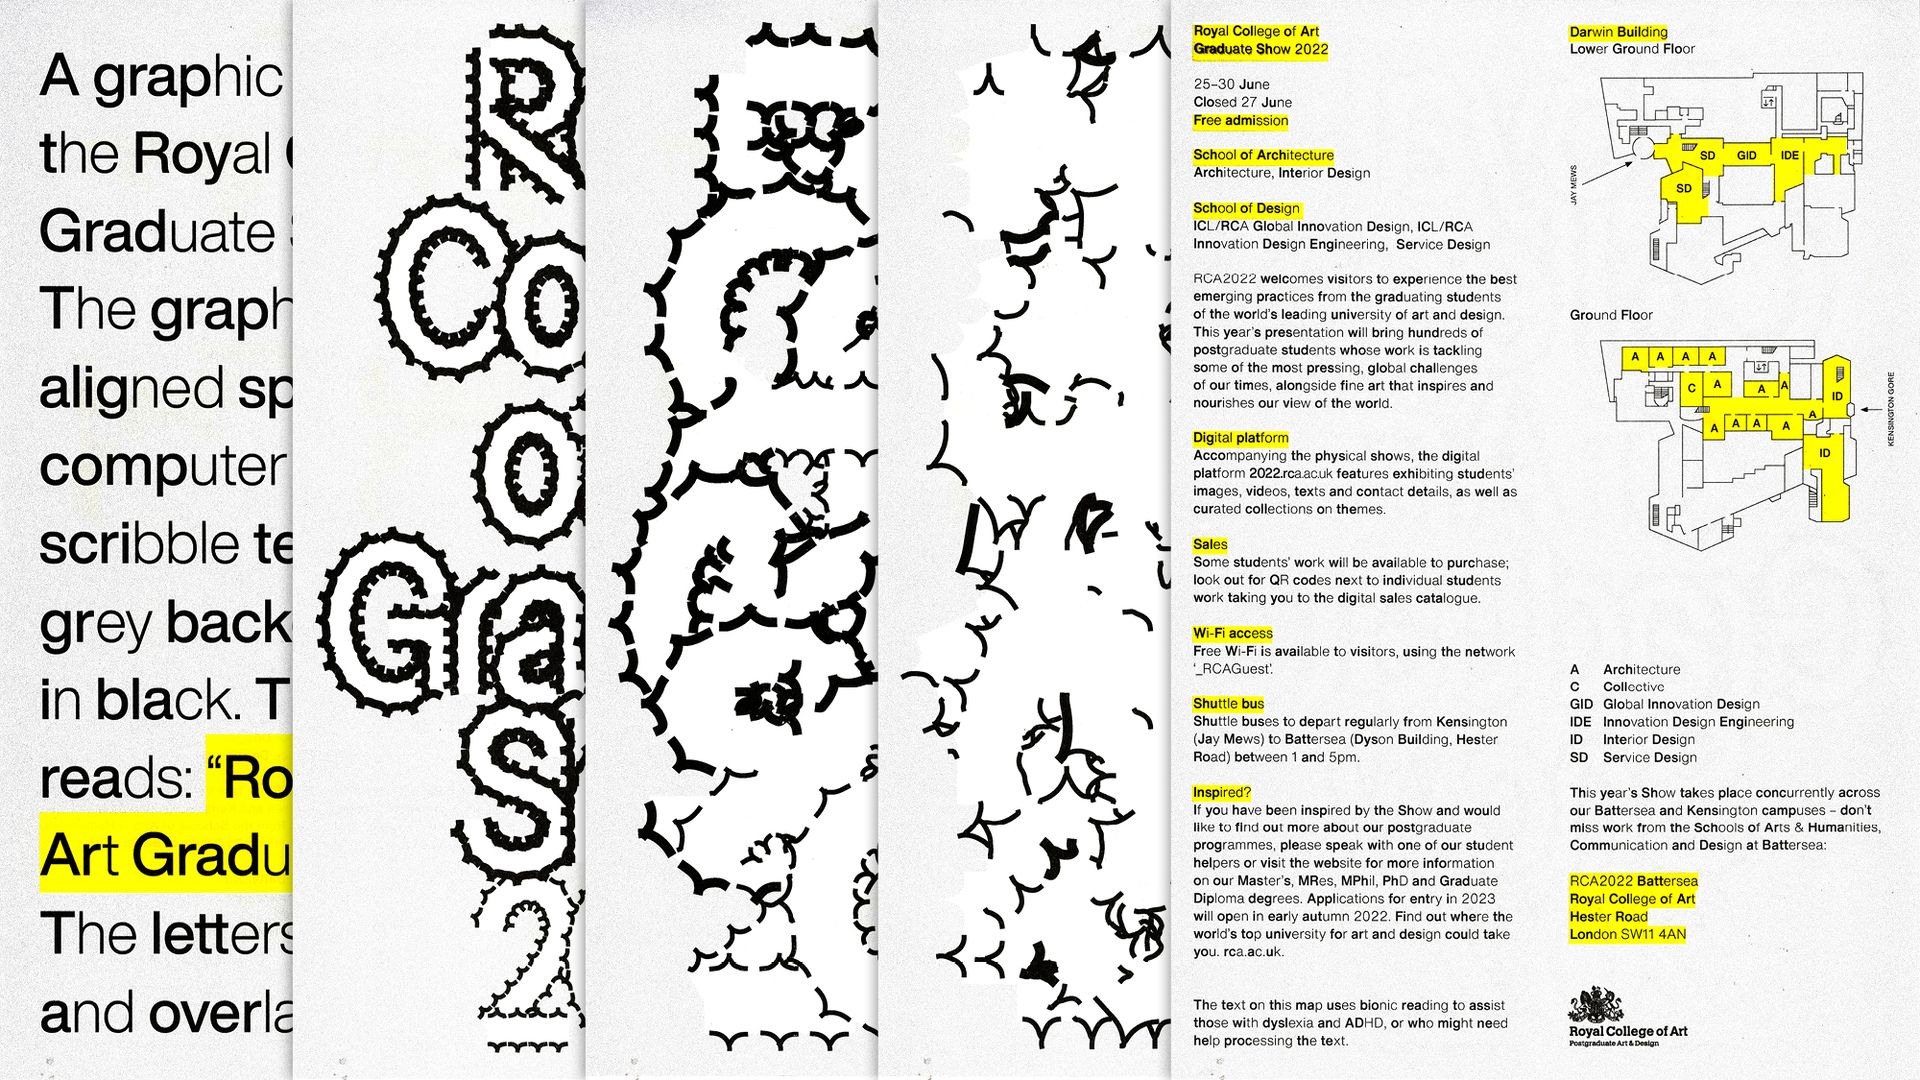 5 sets of graphic mock-ups overlapping each other. (LtoR): Black text on a white background reading like an image description, with some words highlighted in yellow. Three graphics playing with the text ‘Royal College of Art Graduate Show 2022’ with varying degrees of legibility. A map of the Royal College of Art Graduate Show 2022’ showing campus diagrams and wayfinding keys.